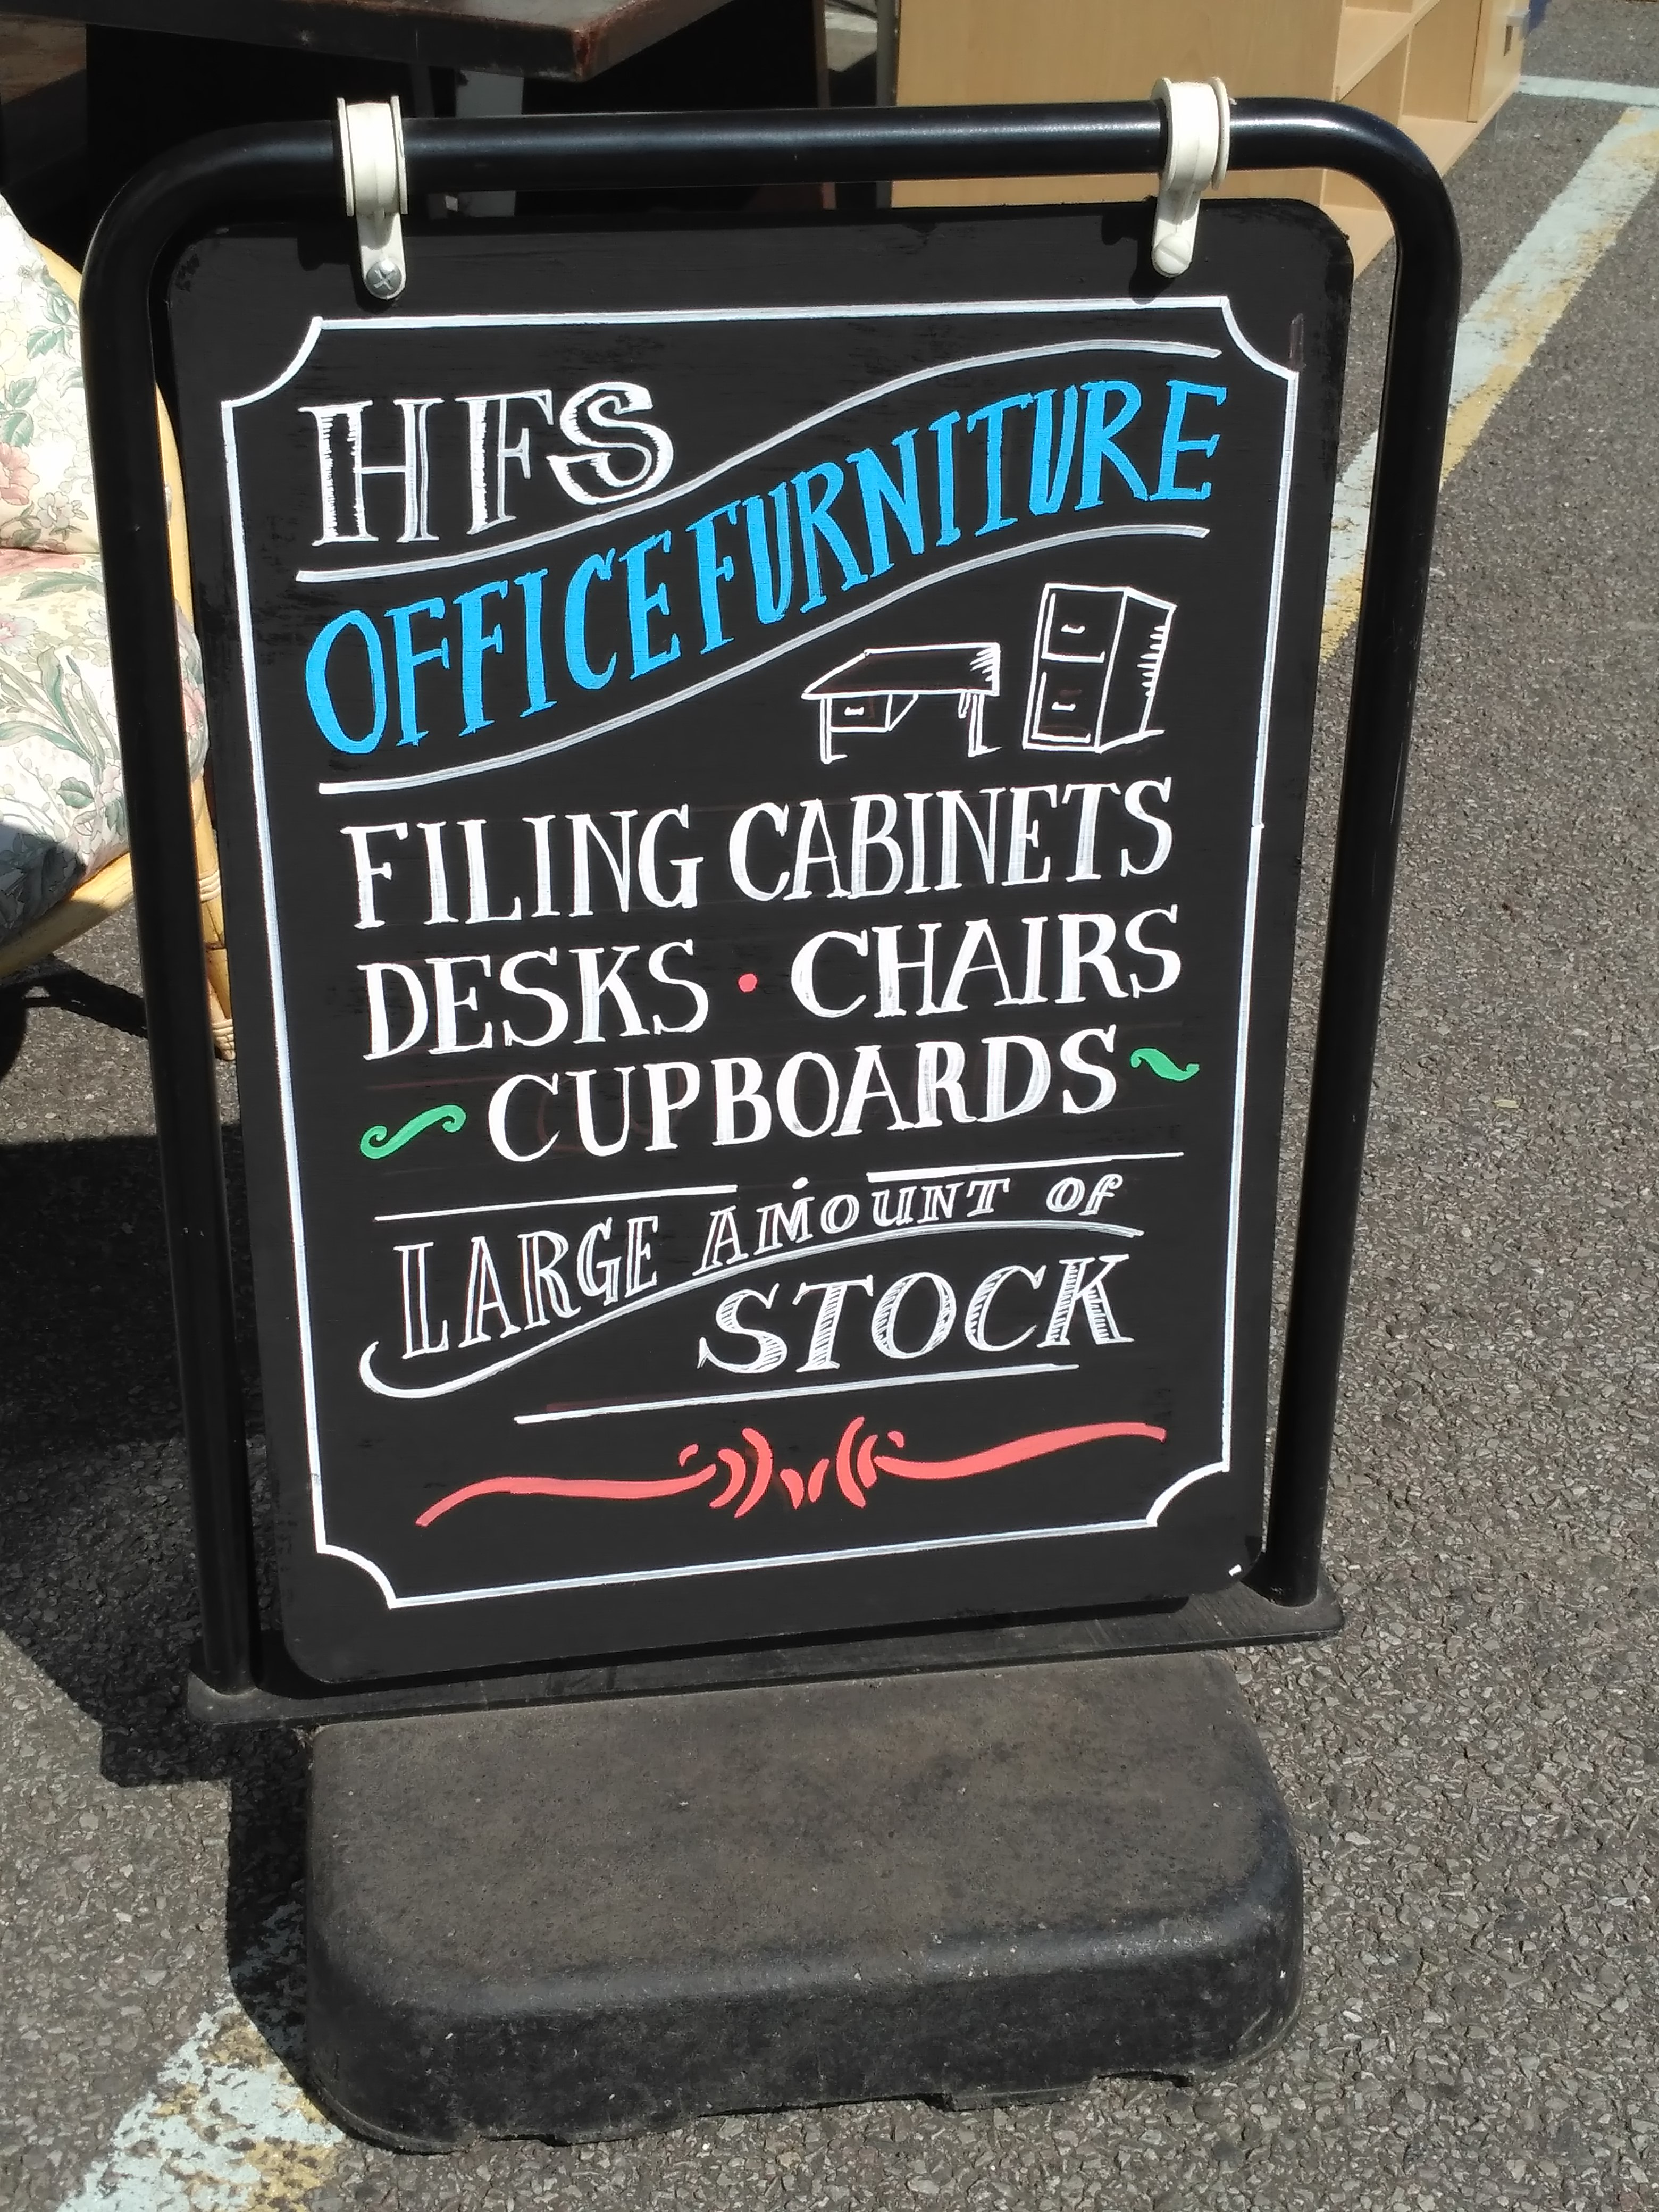 office furniture sign at HFS Bexhill